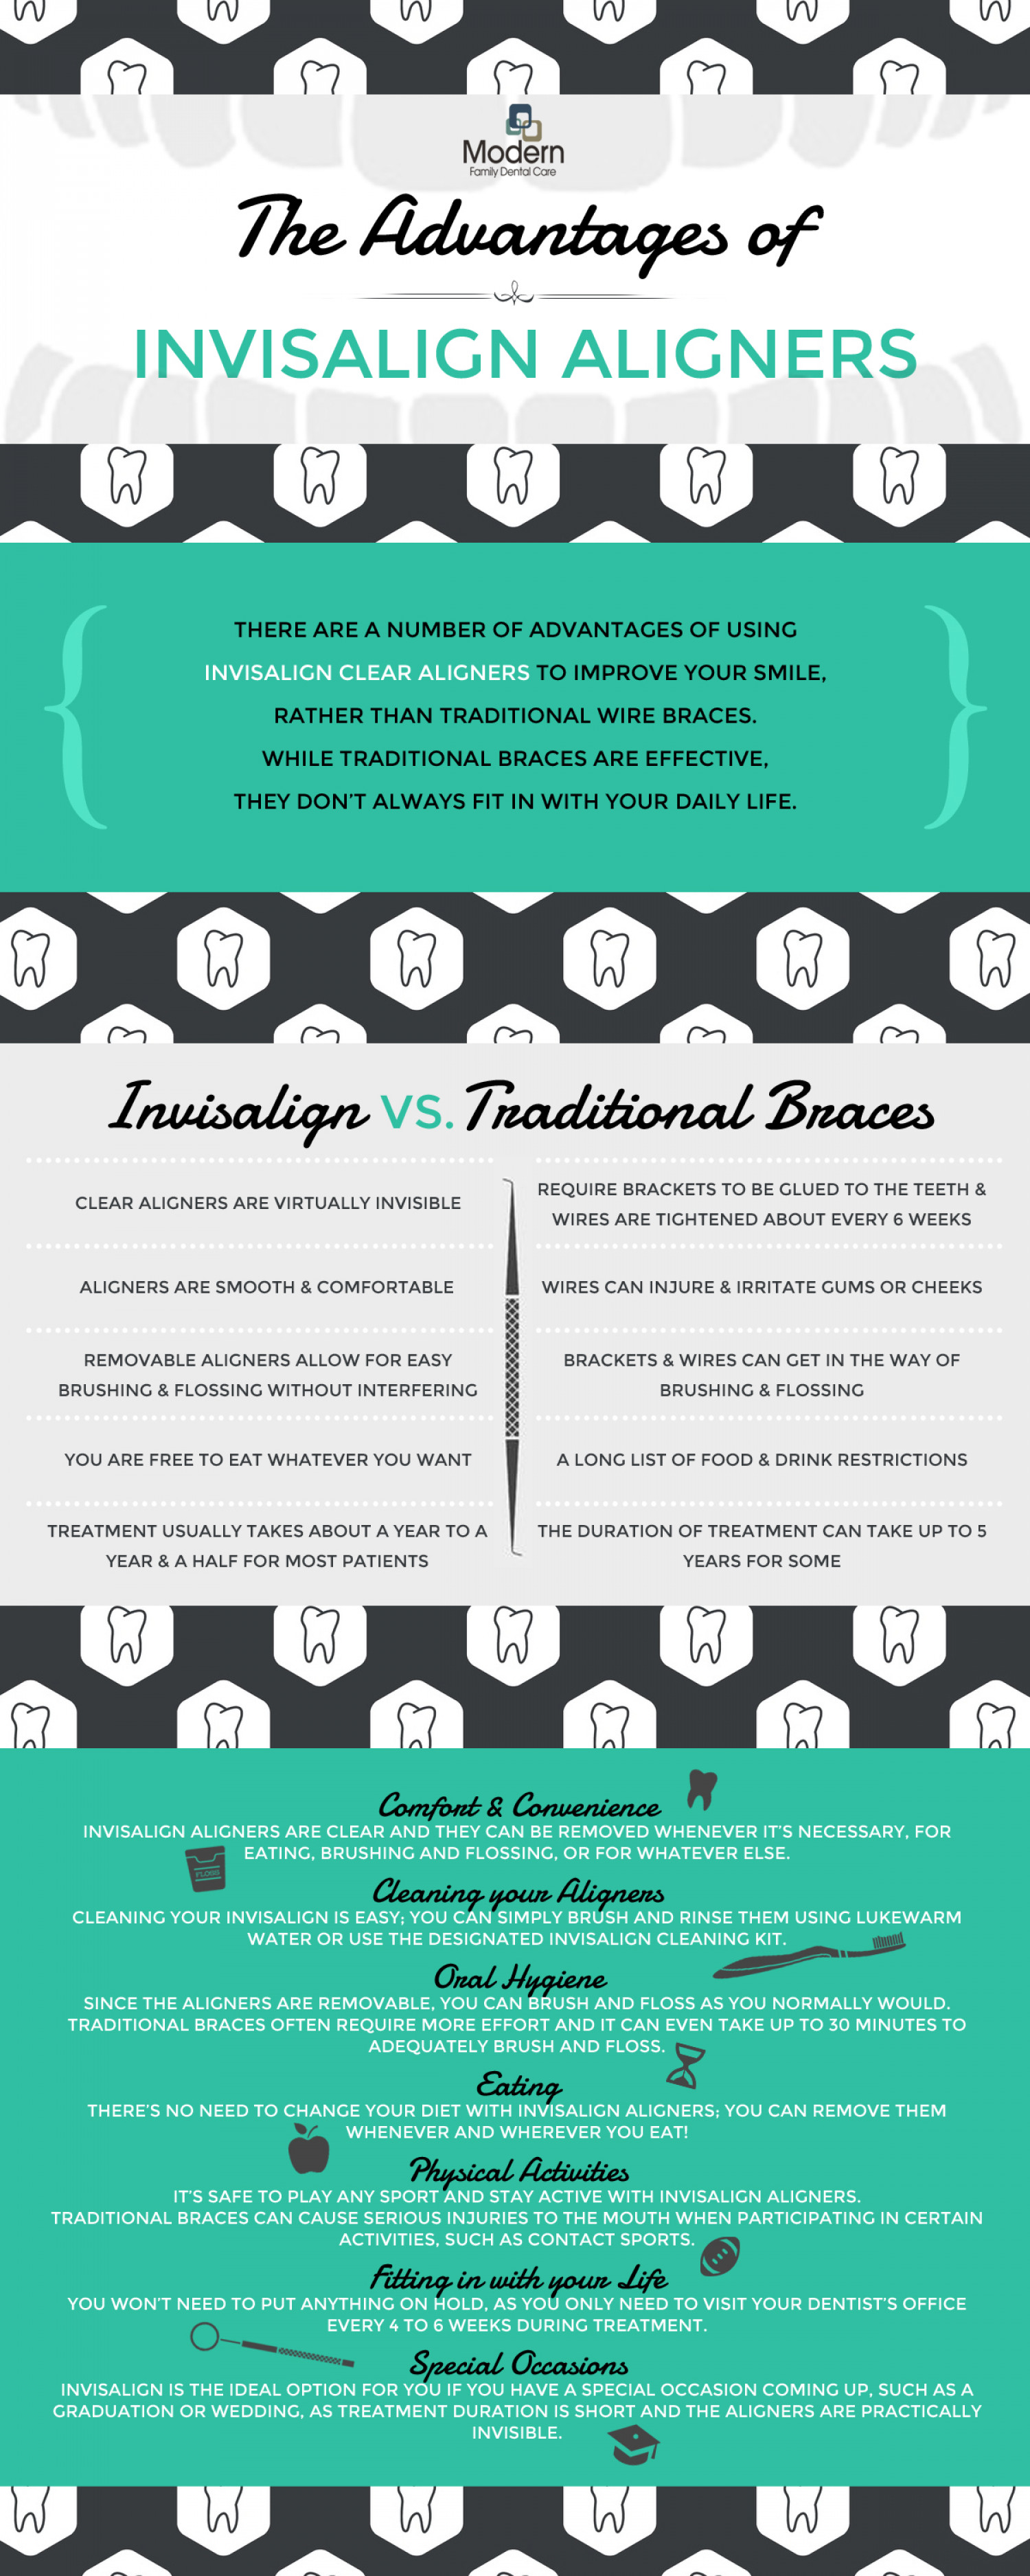 THE ADVANTAGES OF INVISALIGN ALIGNERS  Infographic